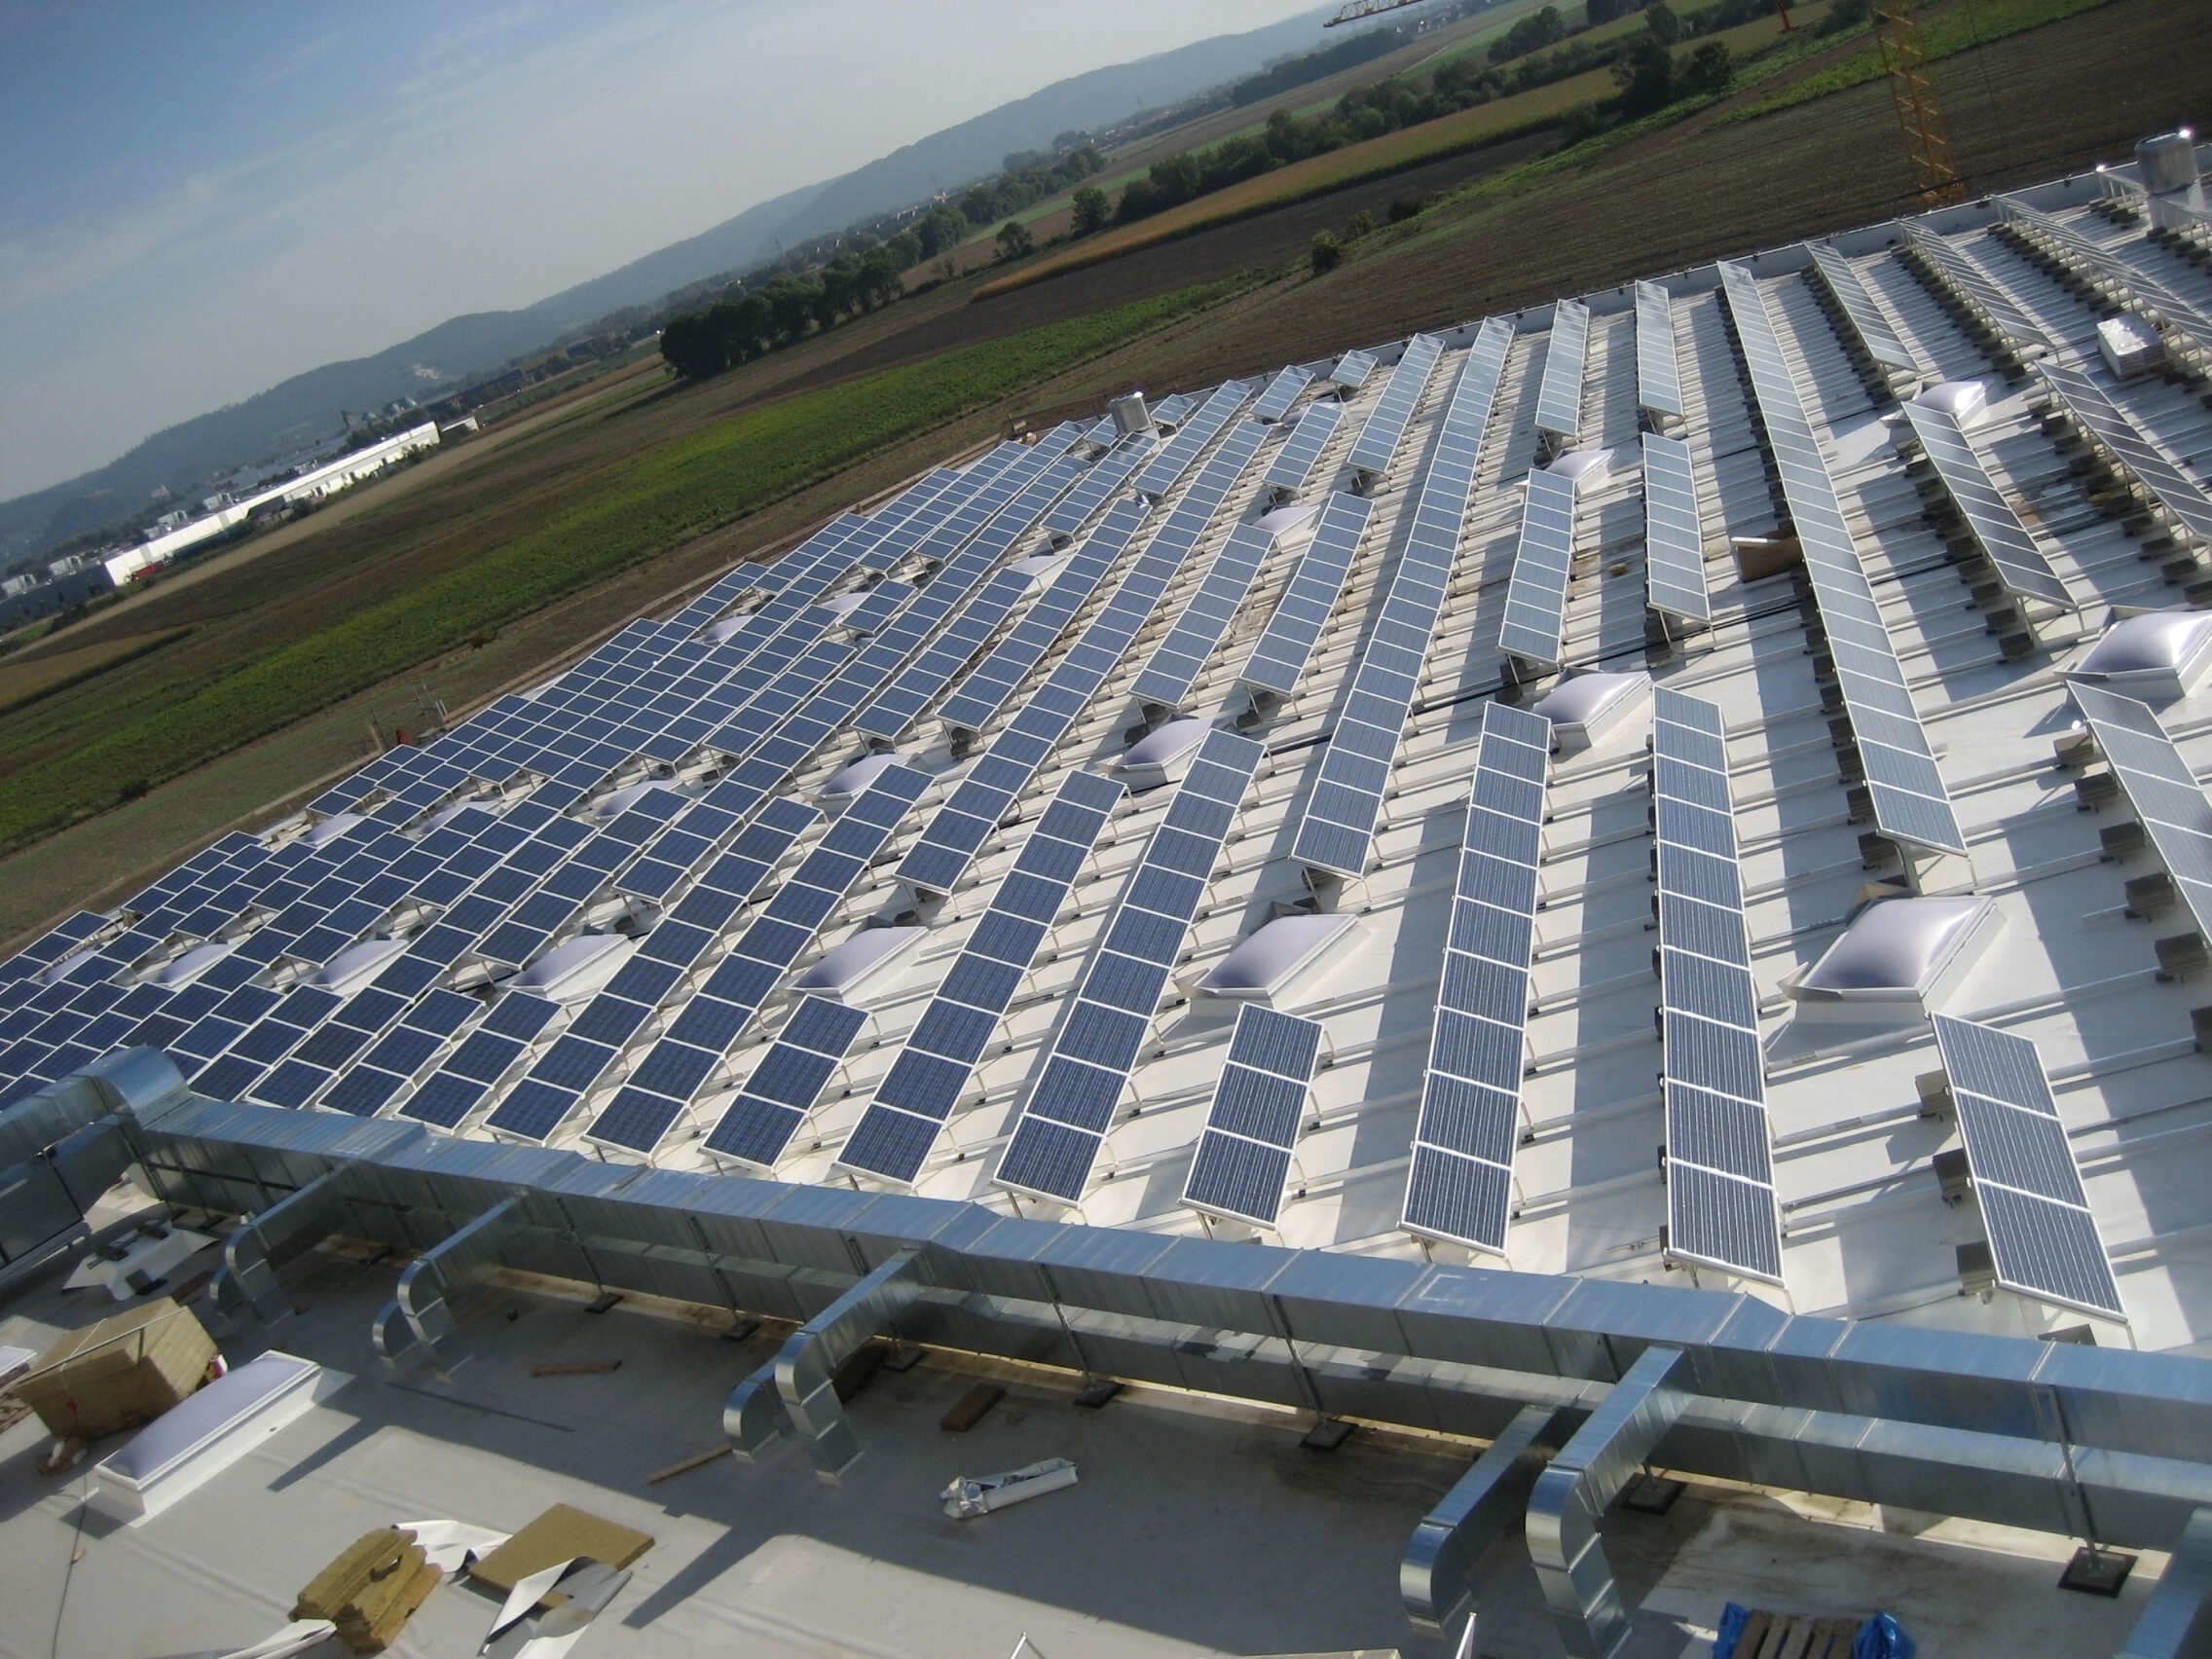 Photovoltaic roofs